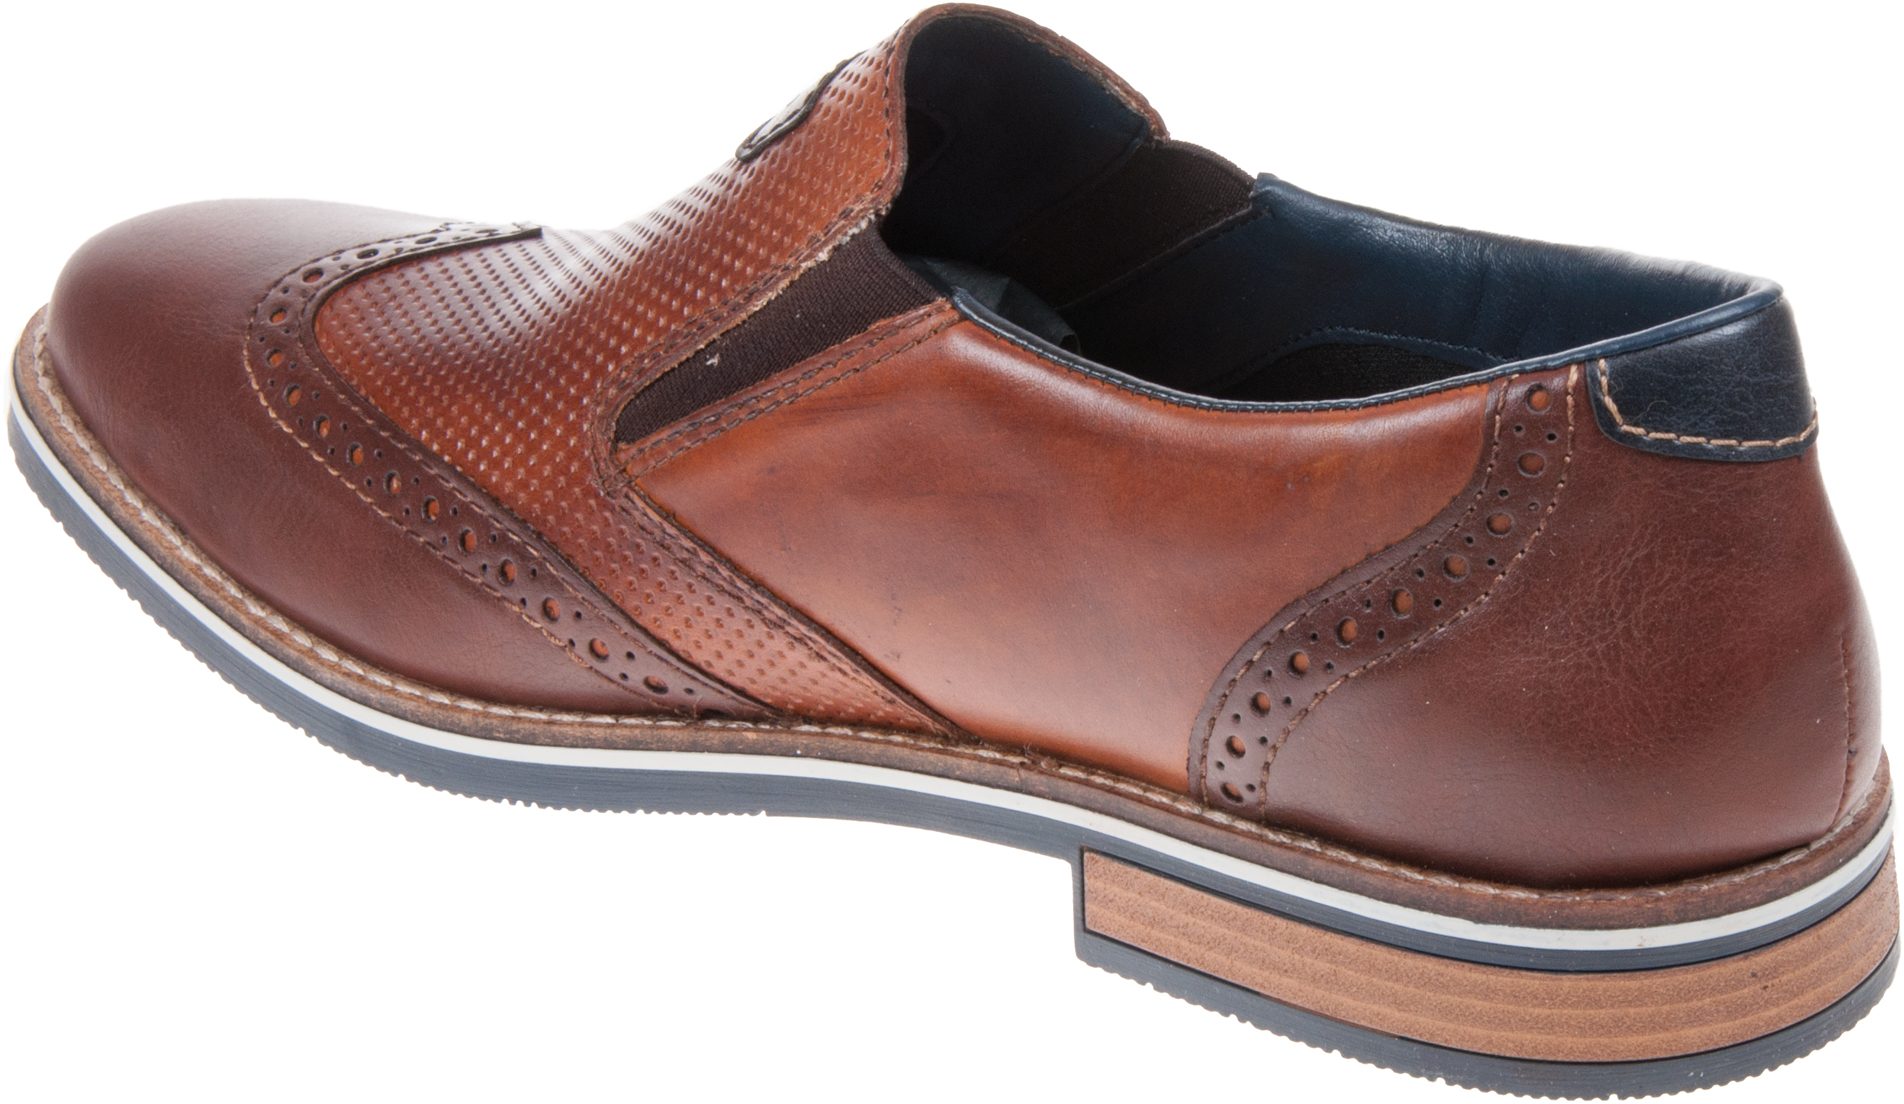 Rieker Bakersfield Brown 13560-25 - Formal Shoes - Humphries Shoes